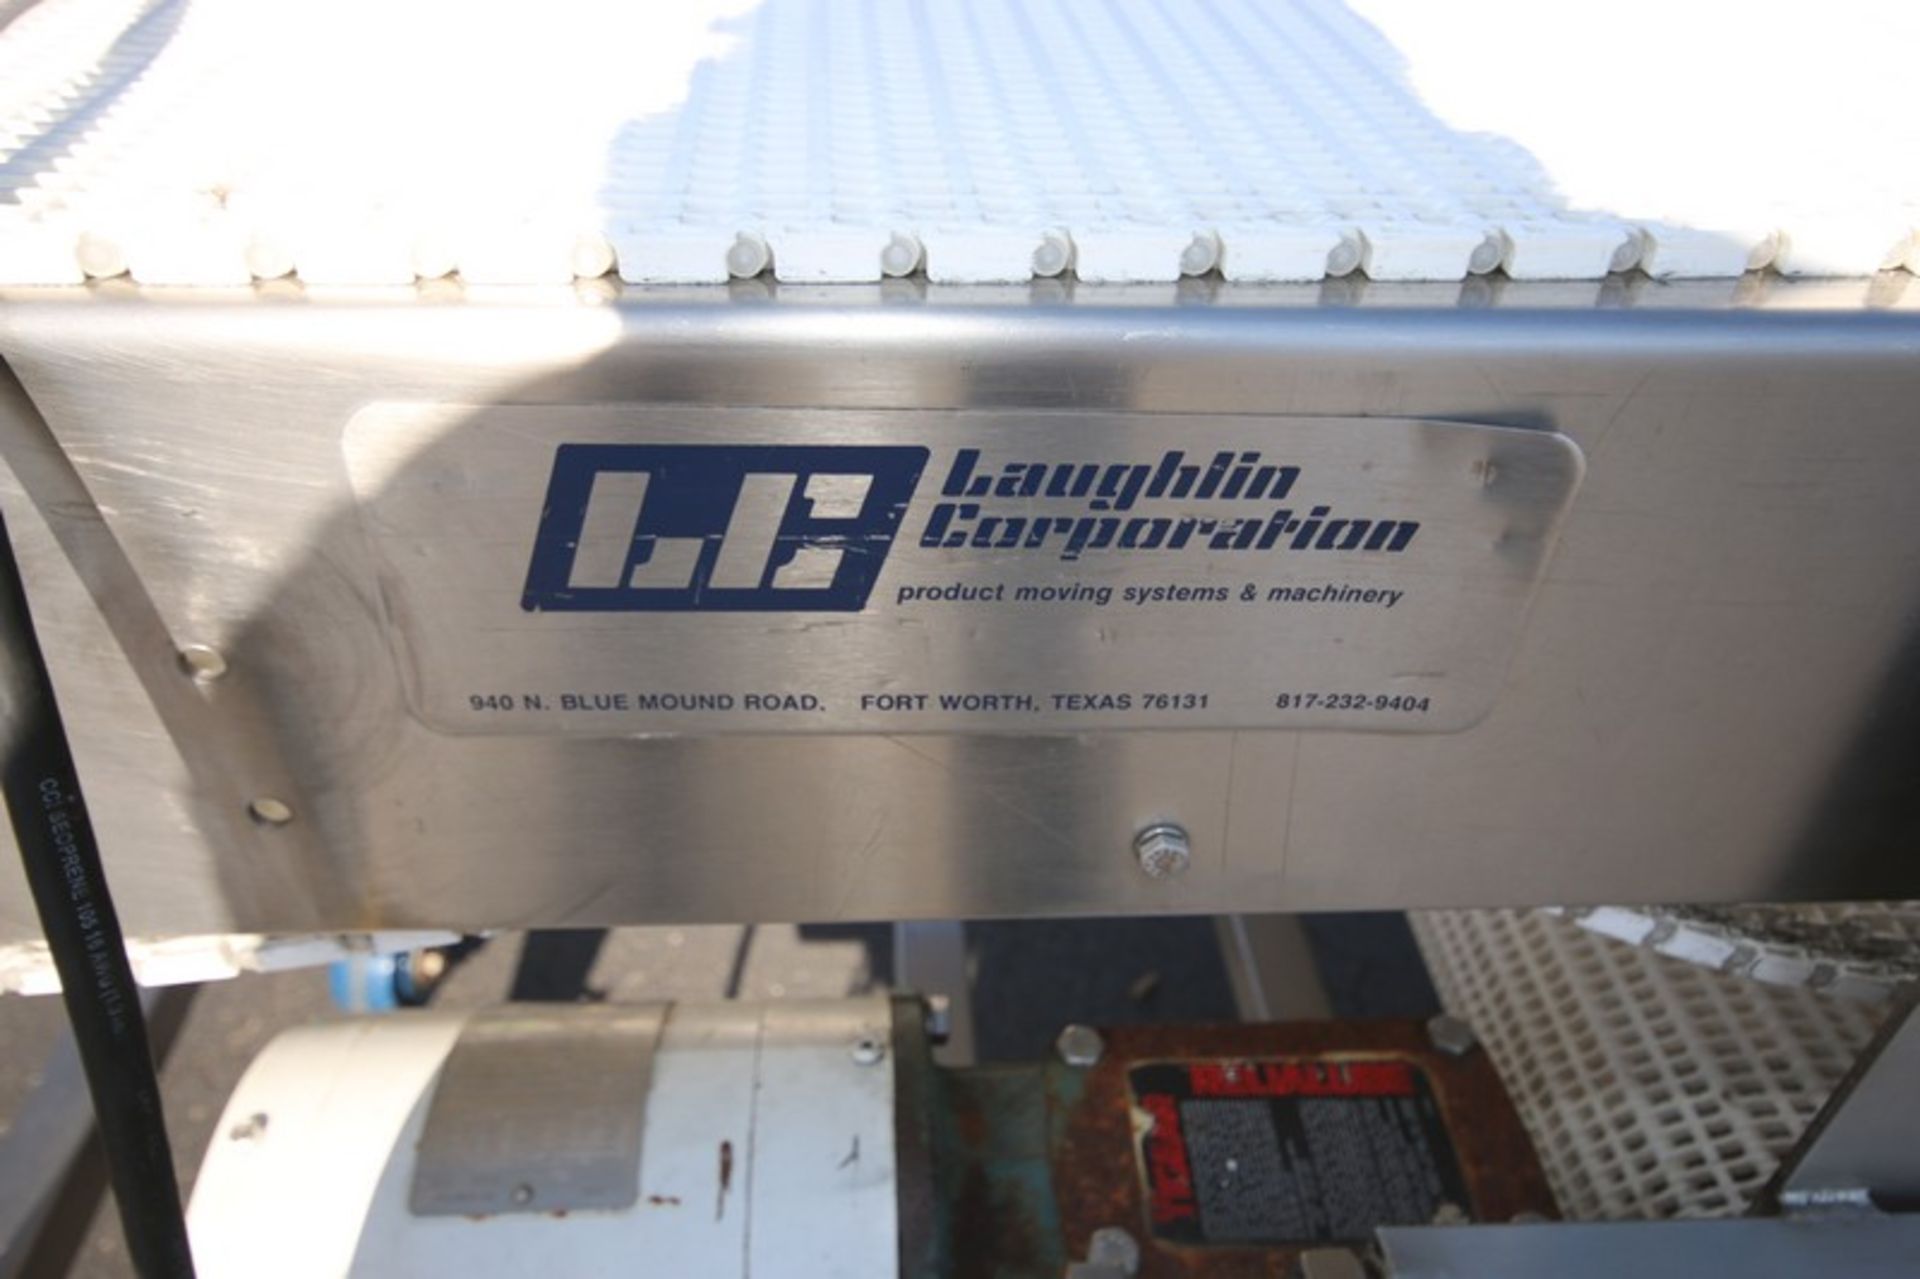 Laughlin Corp / Dawn 92" L x 33" H S/S Portable Belt Conveyor with 22" W Intralox Type Plastic Belt, - Image 7 of 7